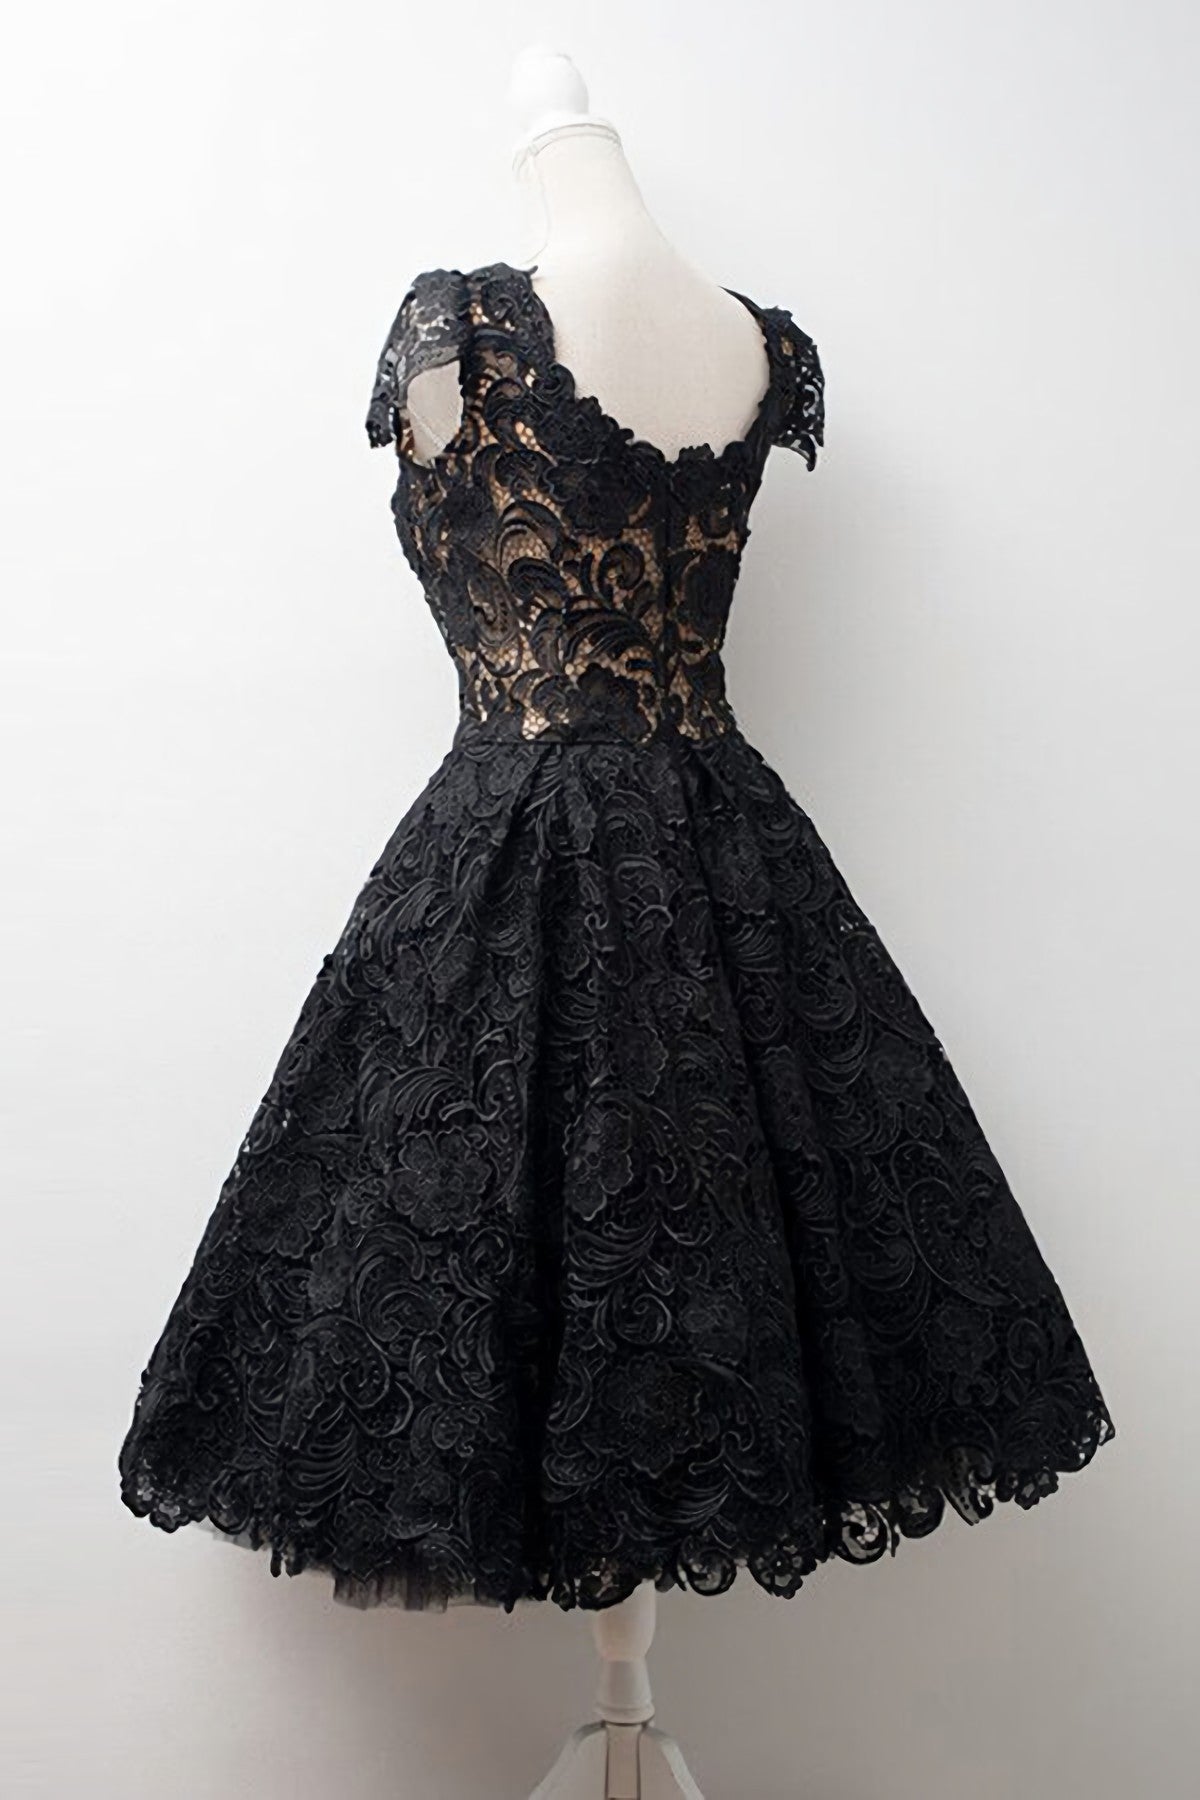 Prom Dresses2033, Short Timeless Scoop Knee-Length Cap Sleeves Black Lace Homecoming Dresses